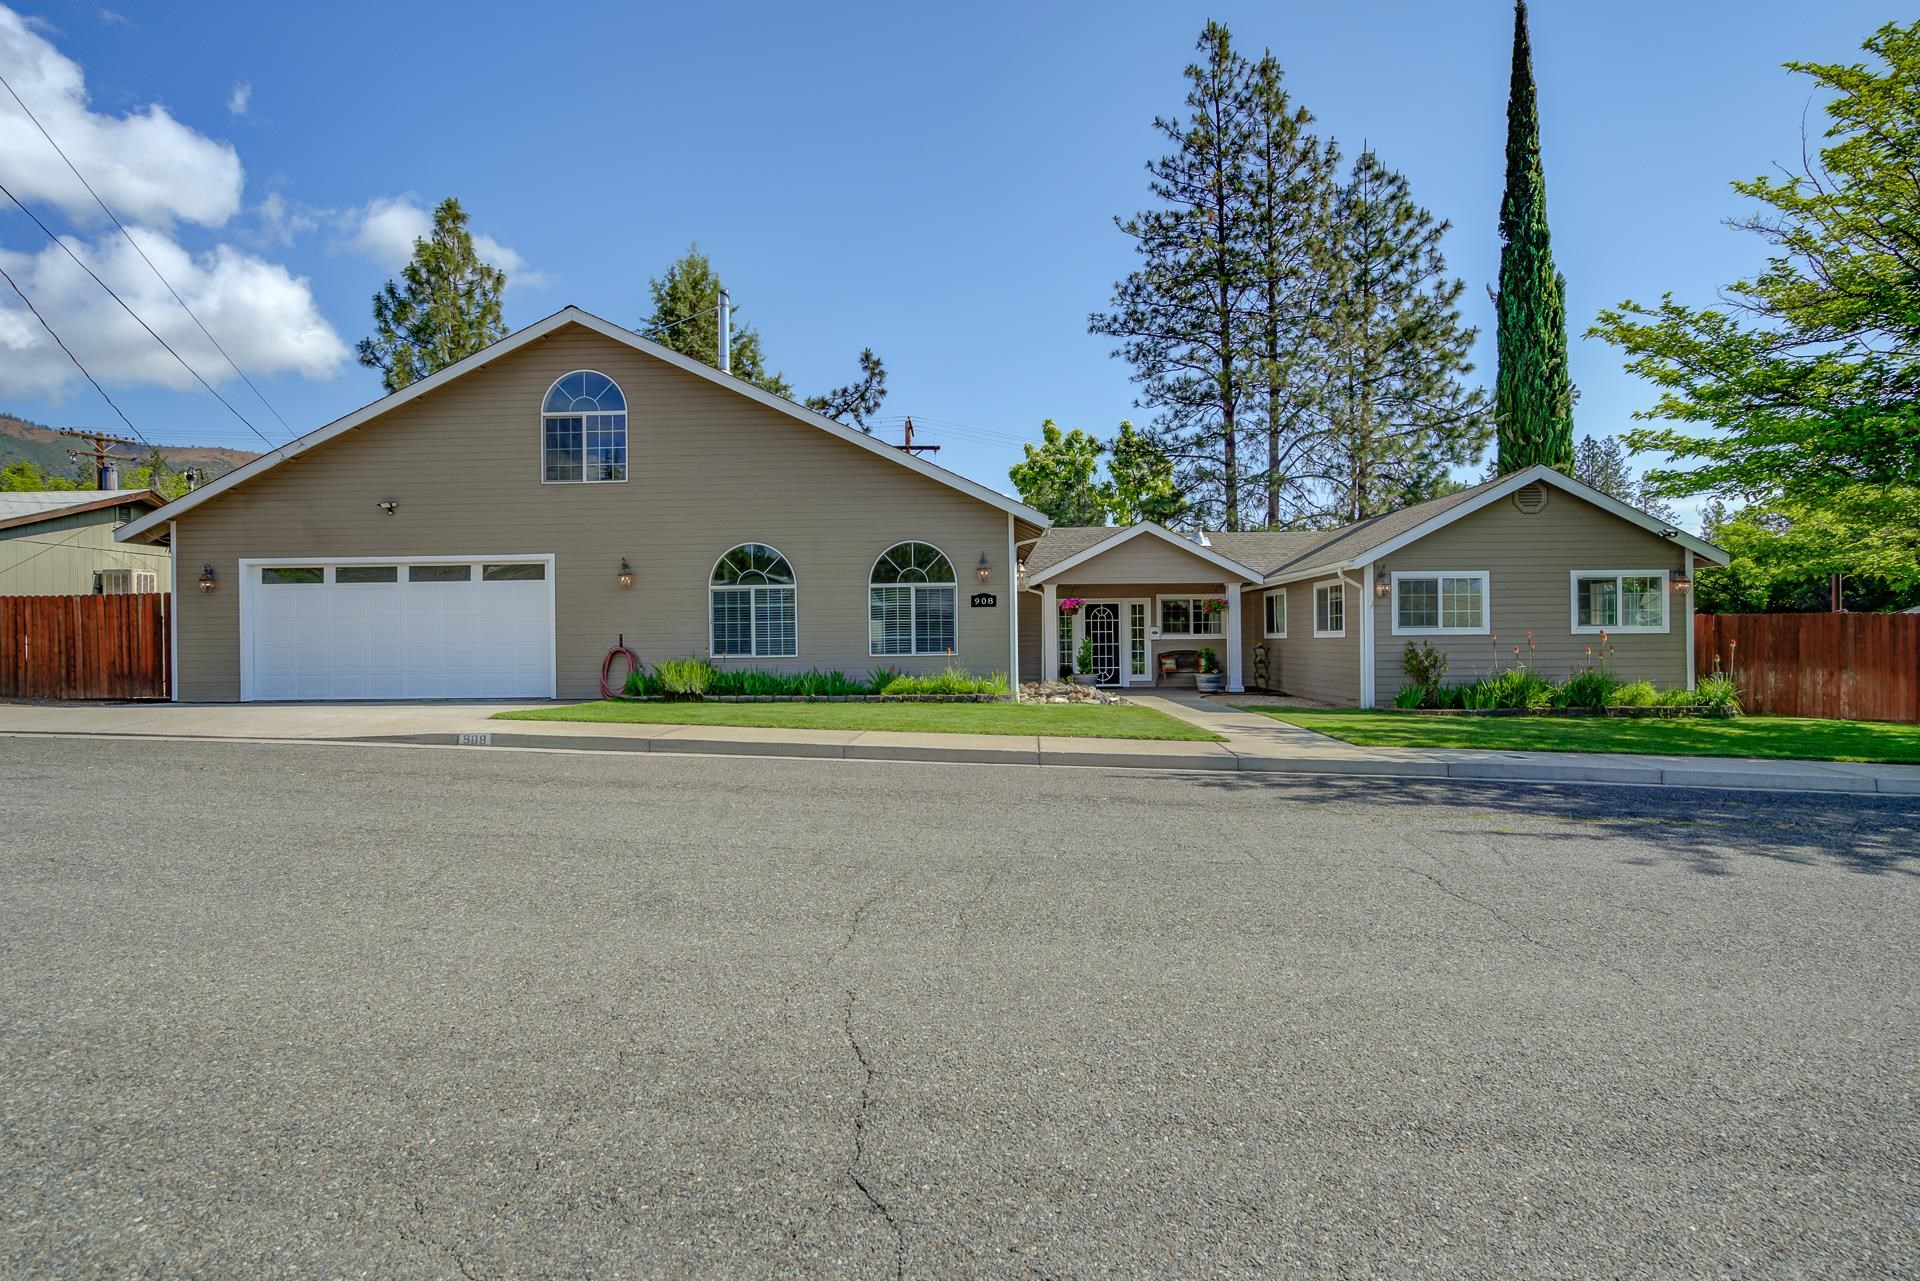 DON'T MISS THIS FANTASTIC MOVE-IN READY HOME! Curb appeal and functionality in one gorgeous home in a great Yreka neighborhood!  Open floor plan is an entertainer's dream.  There is a great kitchen with lots of counter space and a large island! This home boasts 4 bedrooms, and 2 bathrooms and the office can even house a 5th bedroom! Beautiful tilework and the home is impeccably maintained. Stay warm with an efficient monitor heater or enjoy the wood warmth from the cozy and beautiful wood stove. Venting throughout the home allows for the evaporative cooler to keep this large home cool in the hot summer months! Large attached 2 car garage with built in hobby room provides ample space and opportunities. Low maintenance backyard with a large patio and a climbing wall for those with abundant energy! The private backyard is ready for a new lawn or a vegetable garden and the large deck provides plenty of space for outdoor entertaining! Hardie board siding provides durability and fire resistance. Pride in ownership shines through in this property.  This home should qualify for all government loan programs. Make an appointment to view this home today!